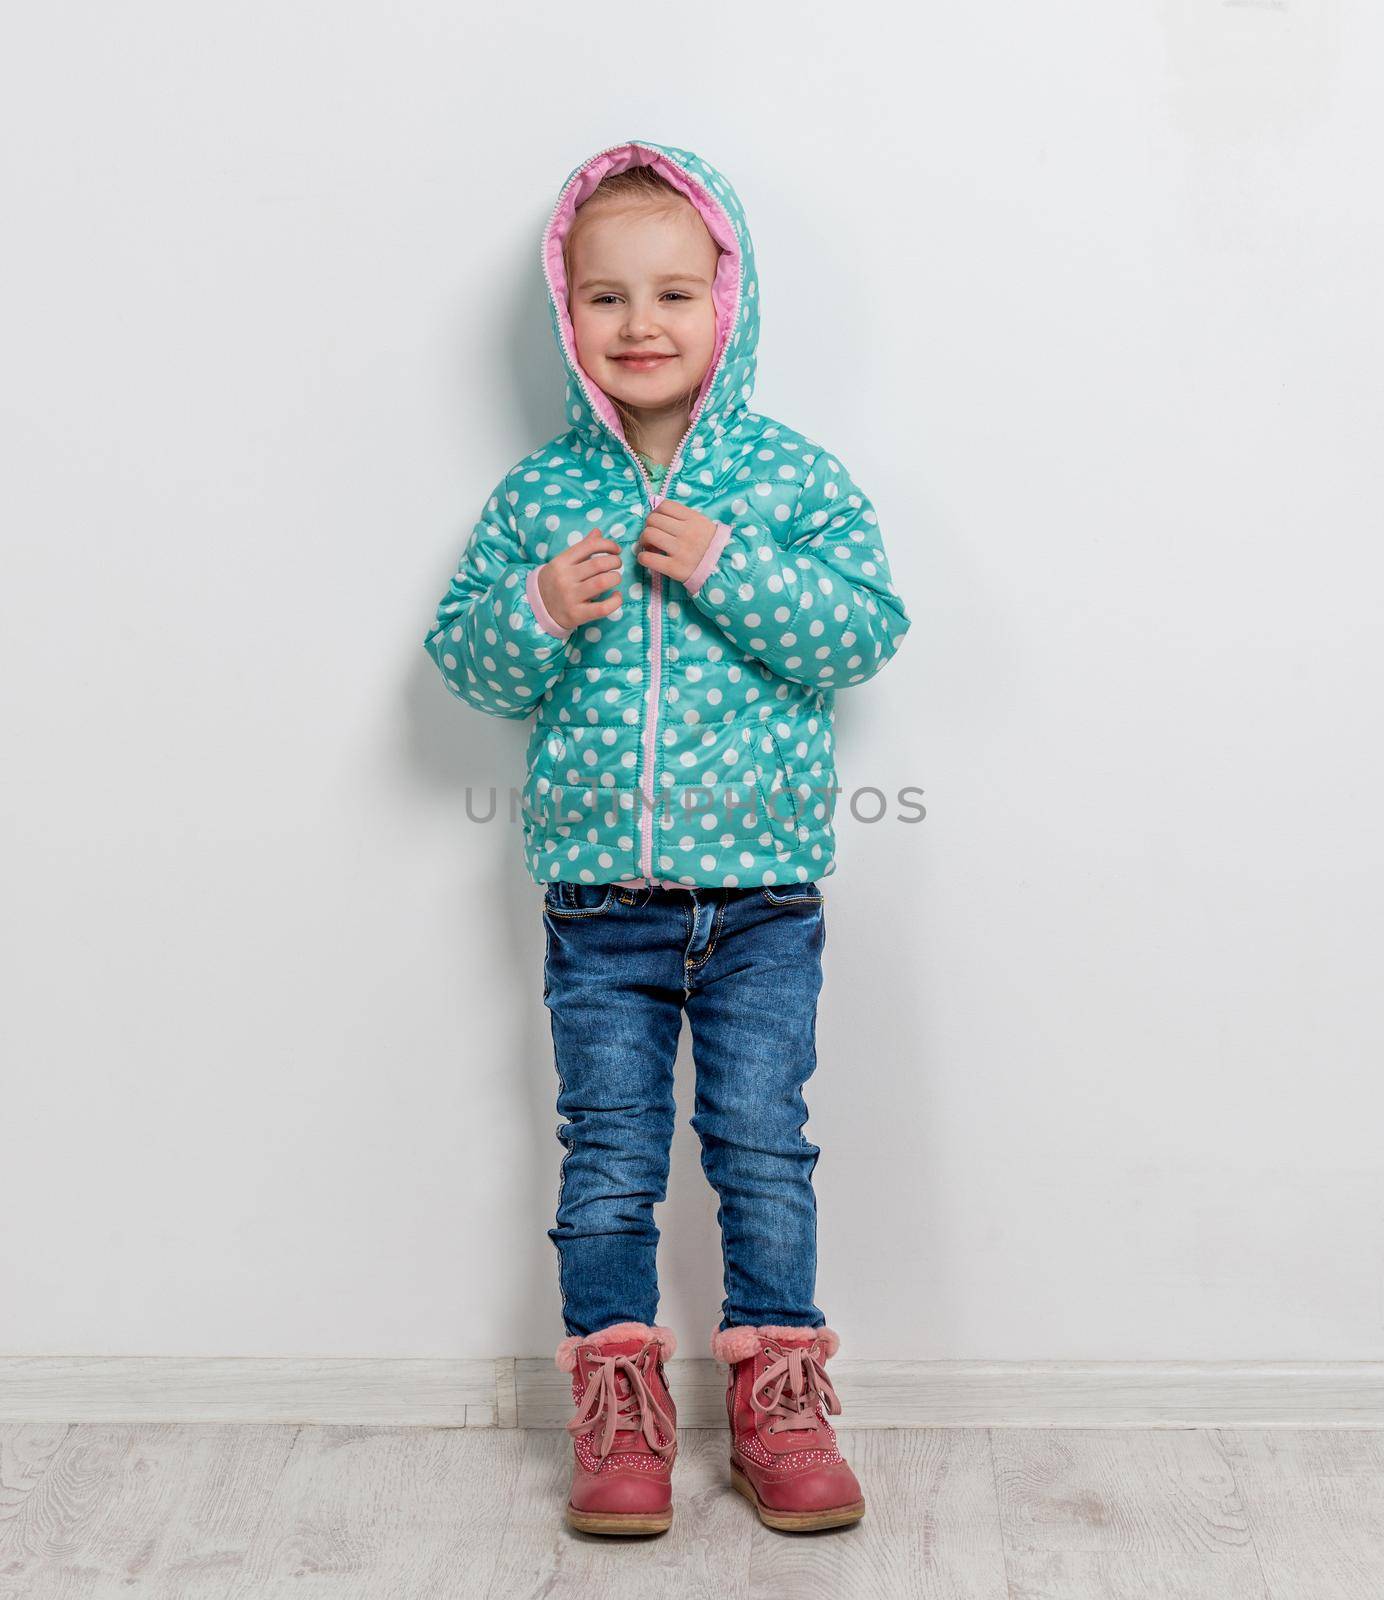 trendy little girl in jeans, jacket and boots by tan4ikk1